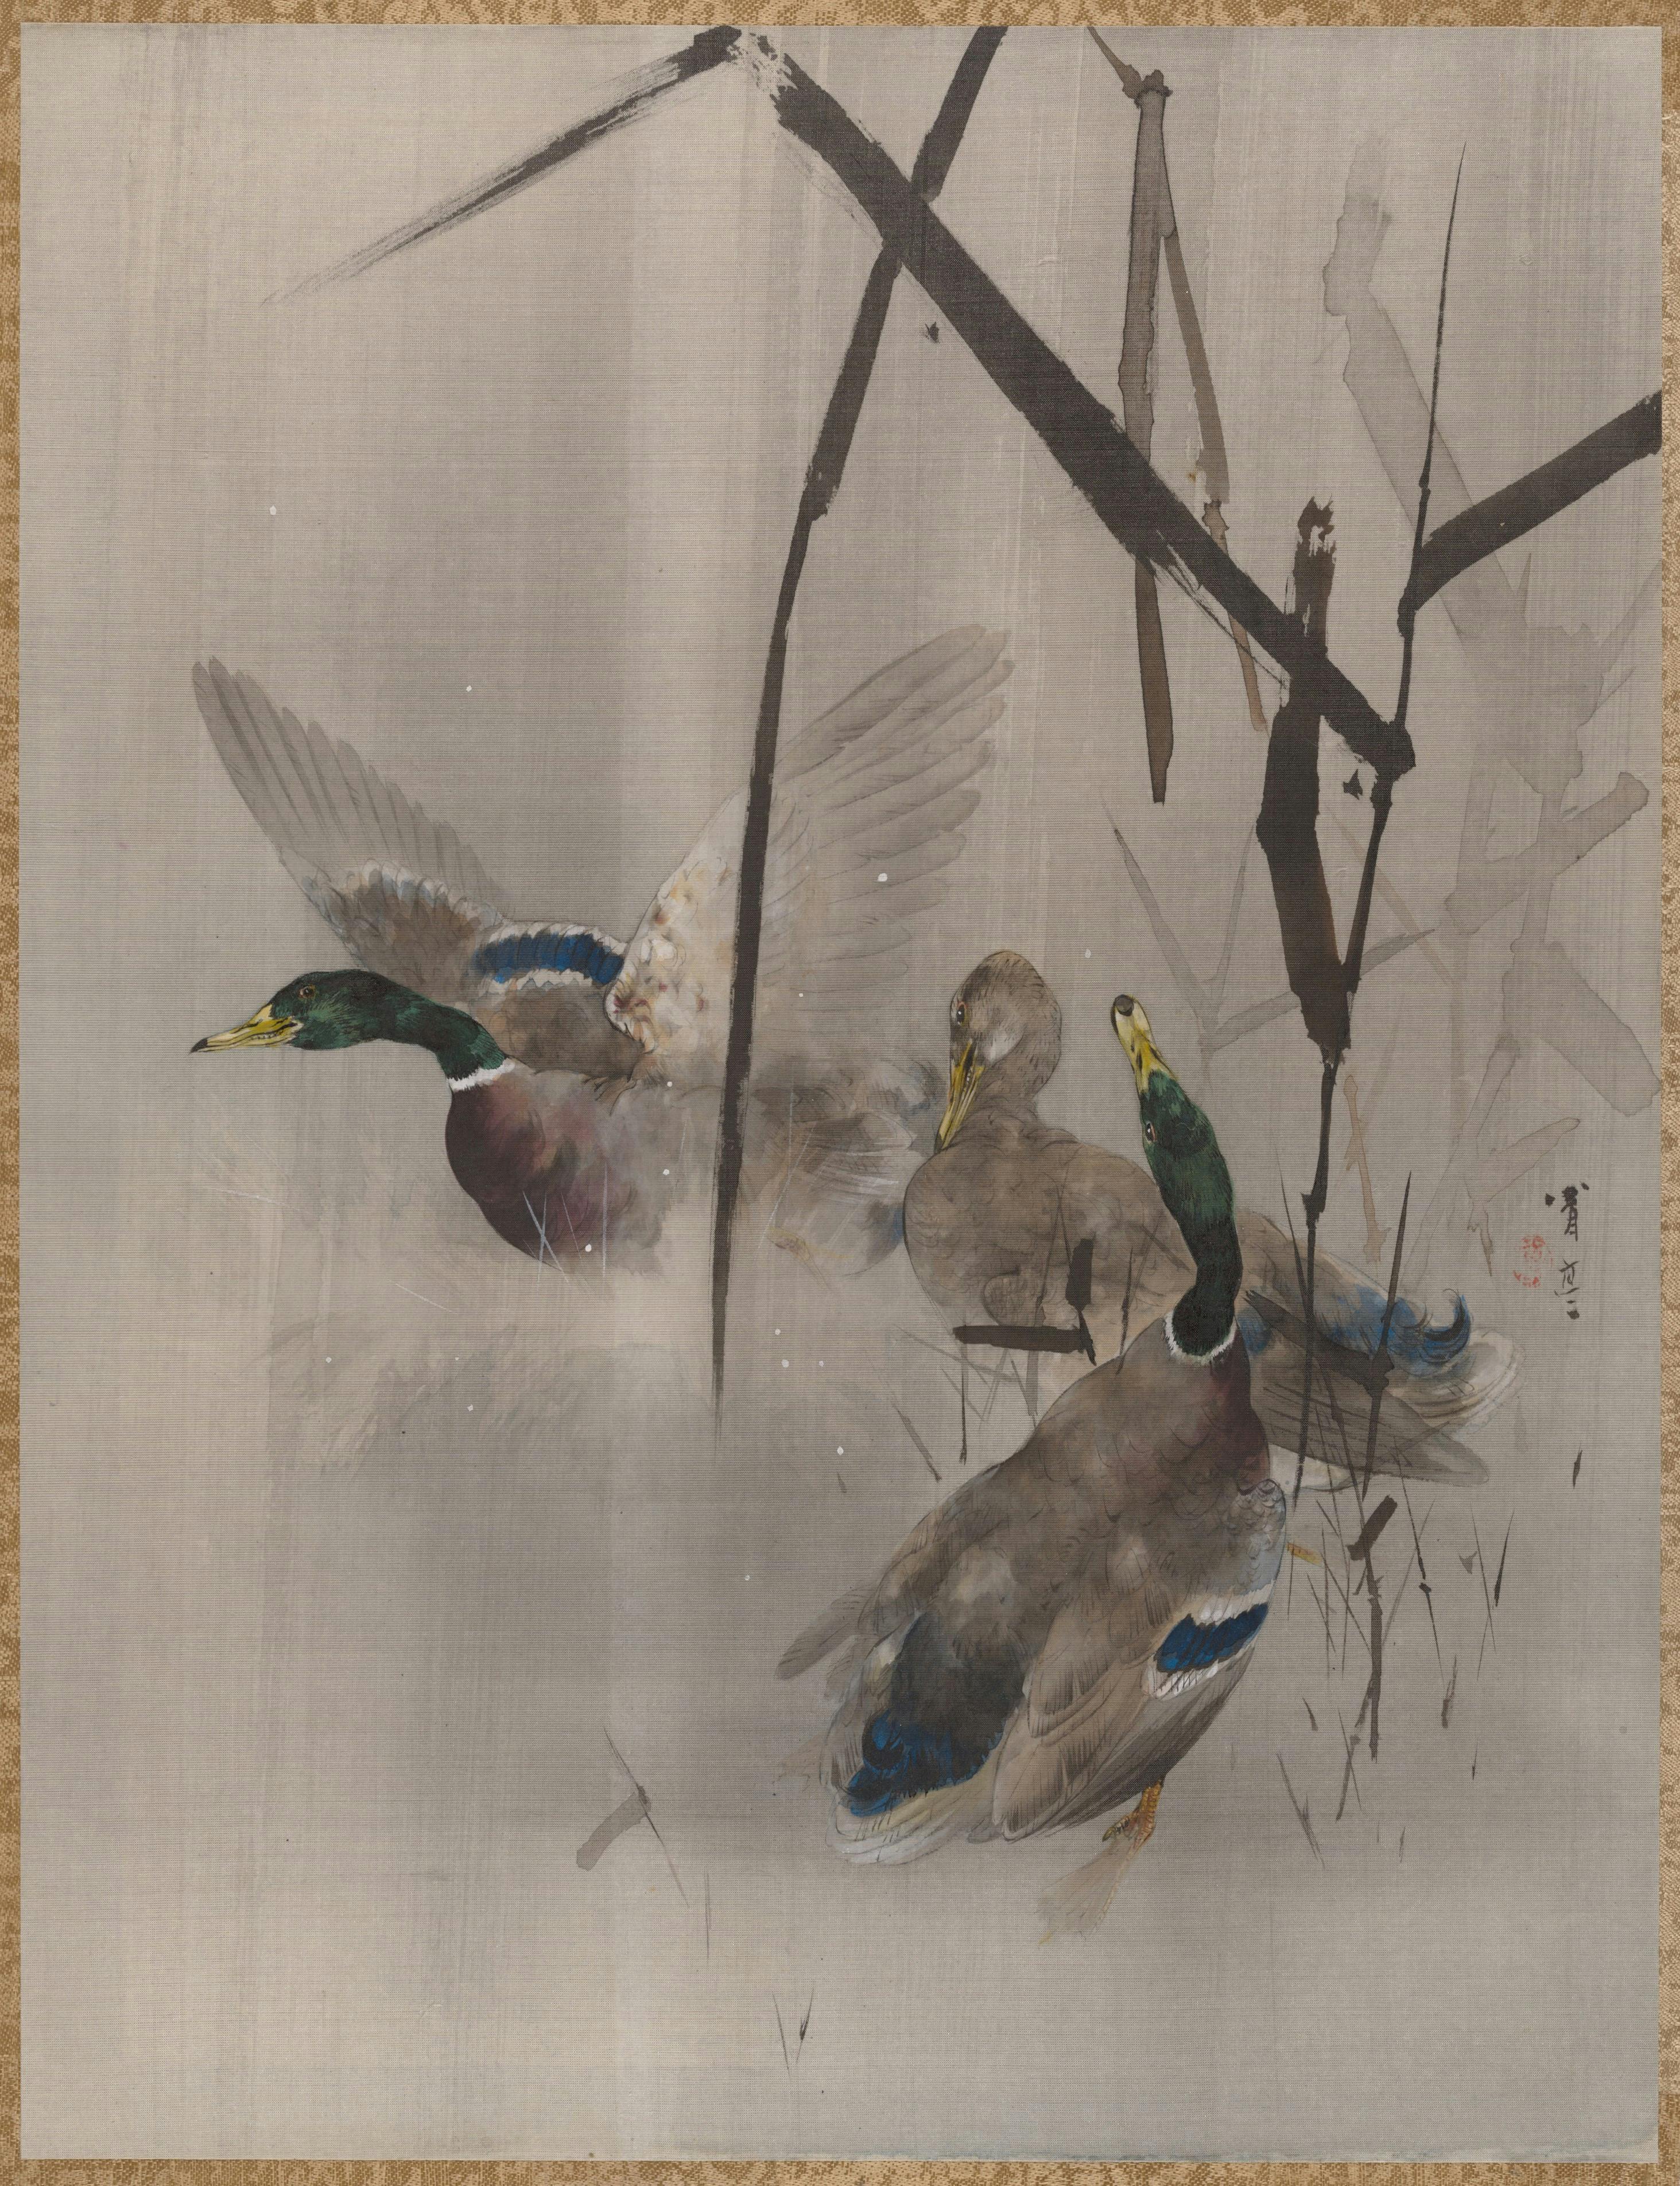 Ducks in the Rushes by Watanabi Seitei, at The Met, New York